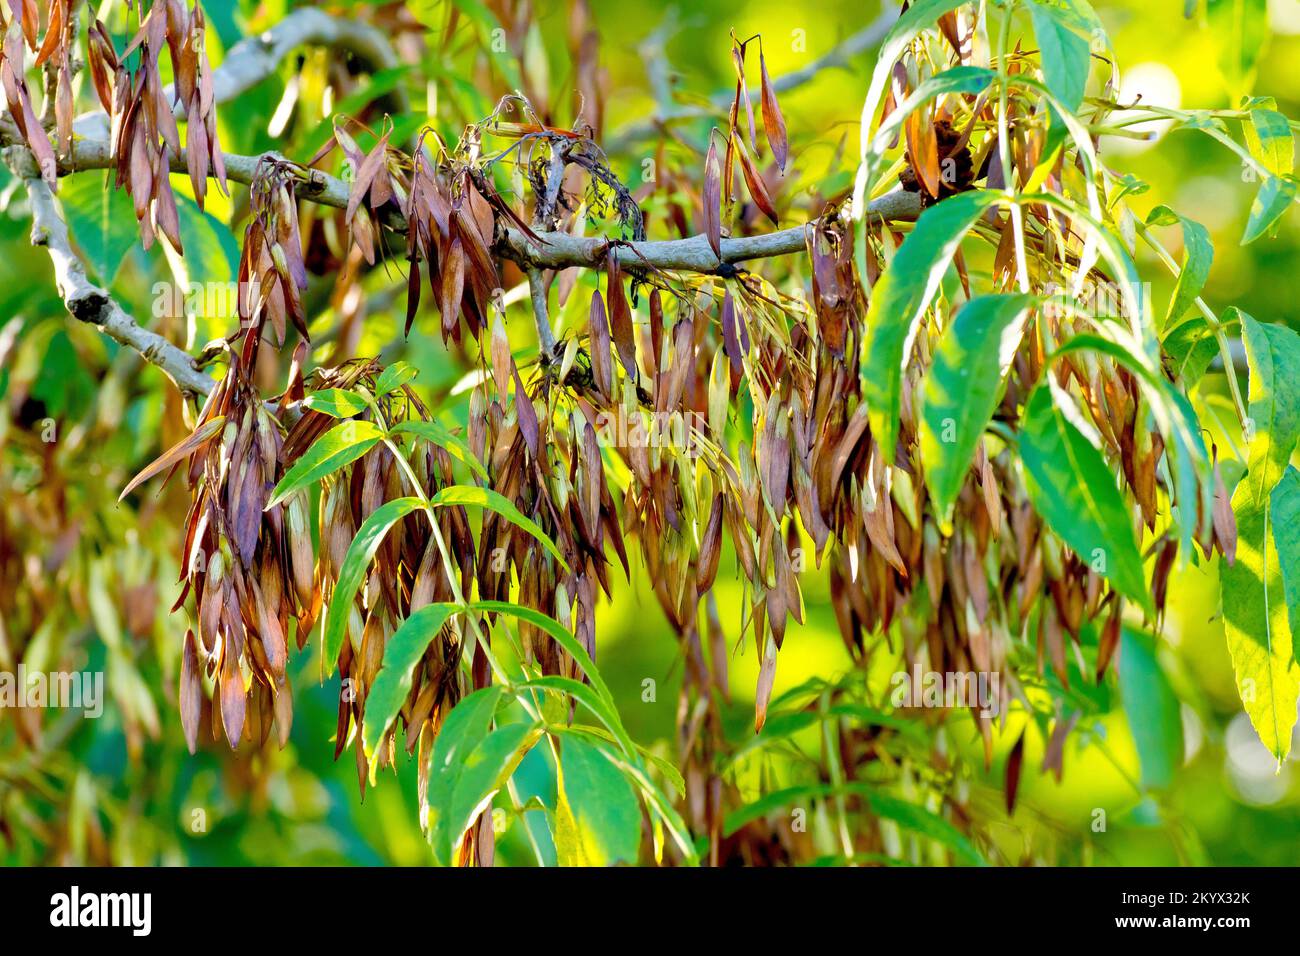 Ash (fraxinus excelsior), close up showing the ripe brown fruits or keys hanging from a tree in the autumn. Stock Photo